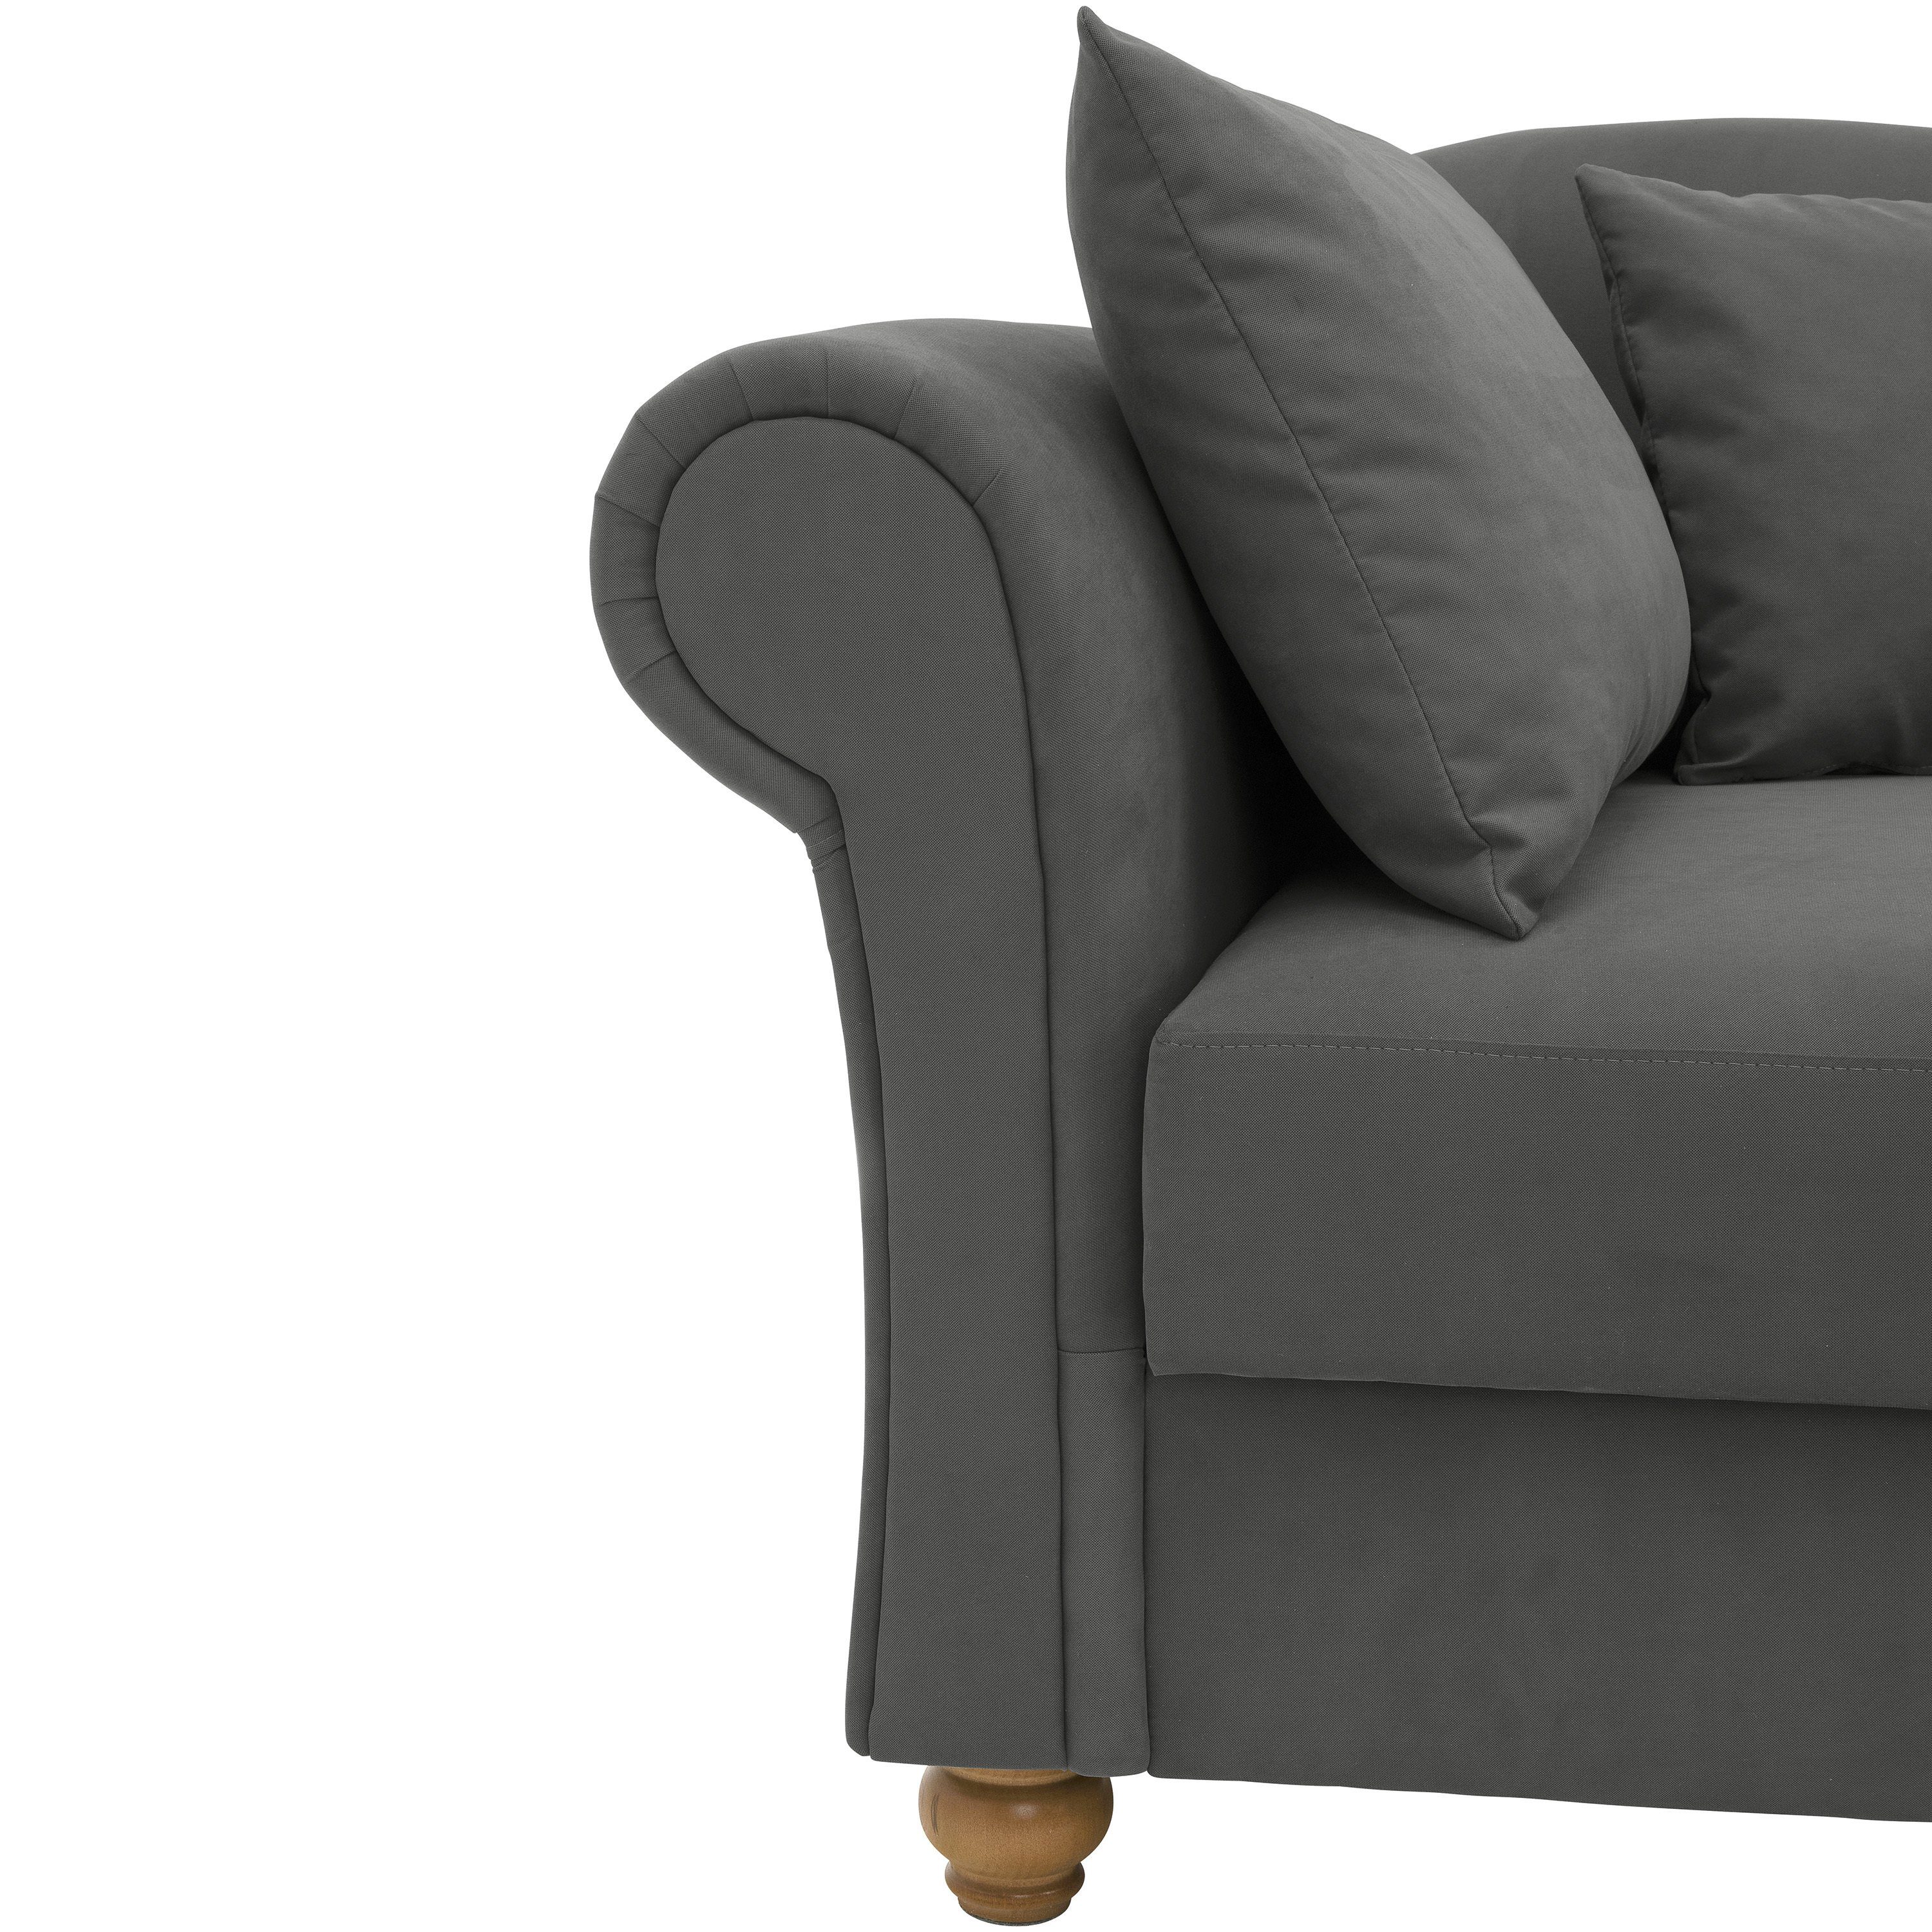 Max links Evelyn, Sofa Armlehne Recamiere Winzer®